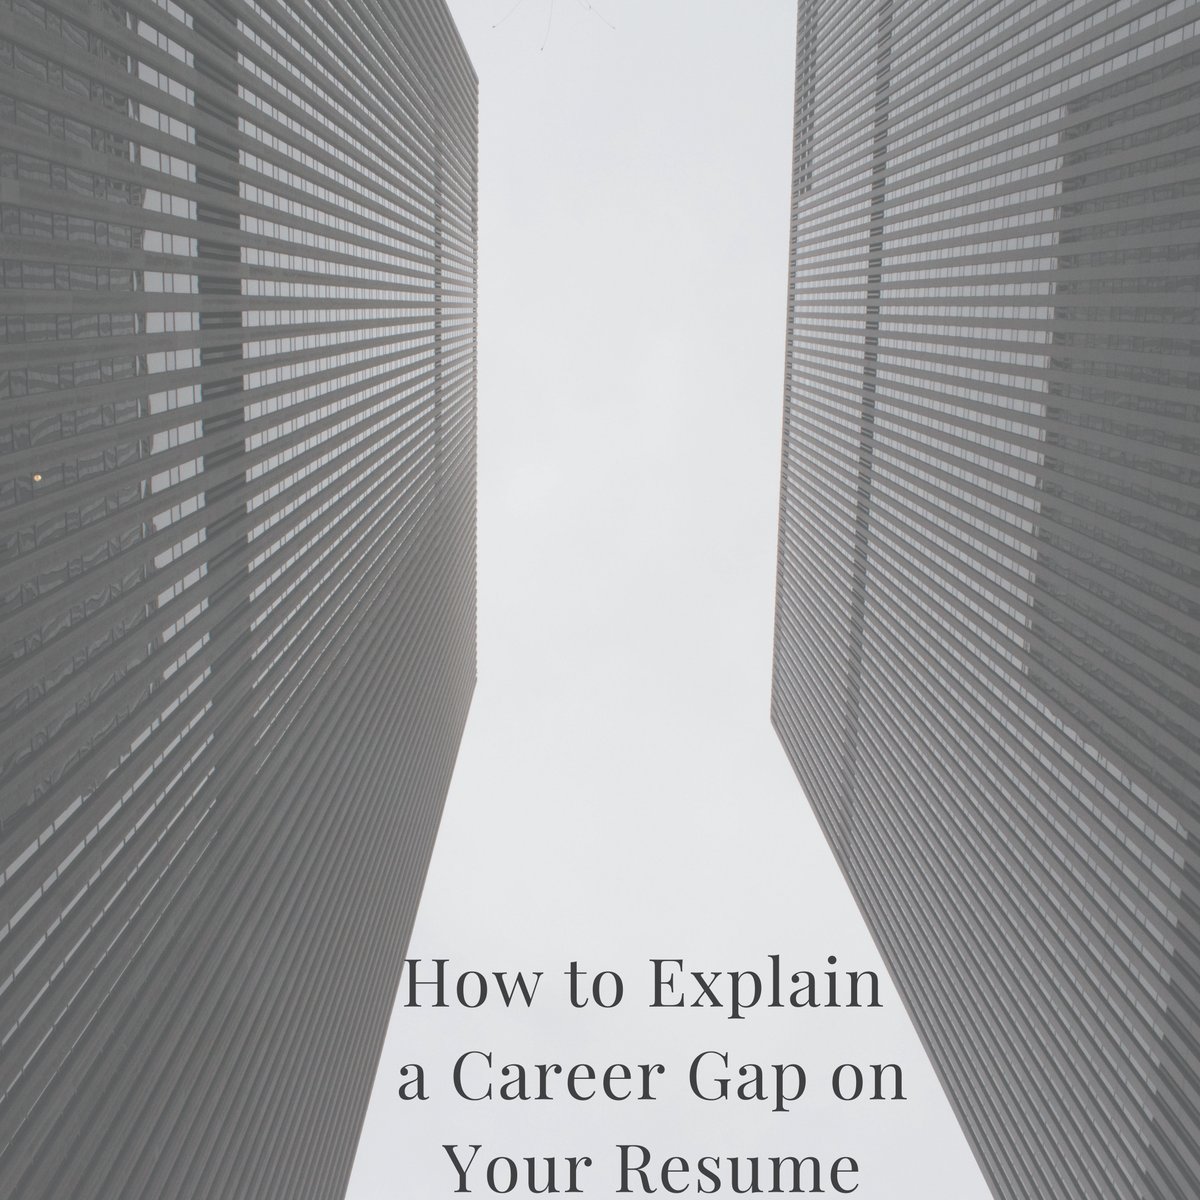 As an Executive Resume Writer, I hear the question, “Should I address my employment gap?” all the time. As always, my response is, “Yes.” How you address it depends on the situation. 

Read how to explain an employment gap here: bit.ly/33MeI61

#careergap #employmentgap